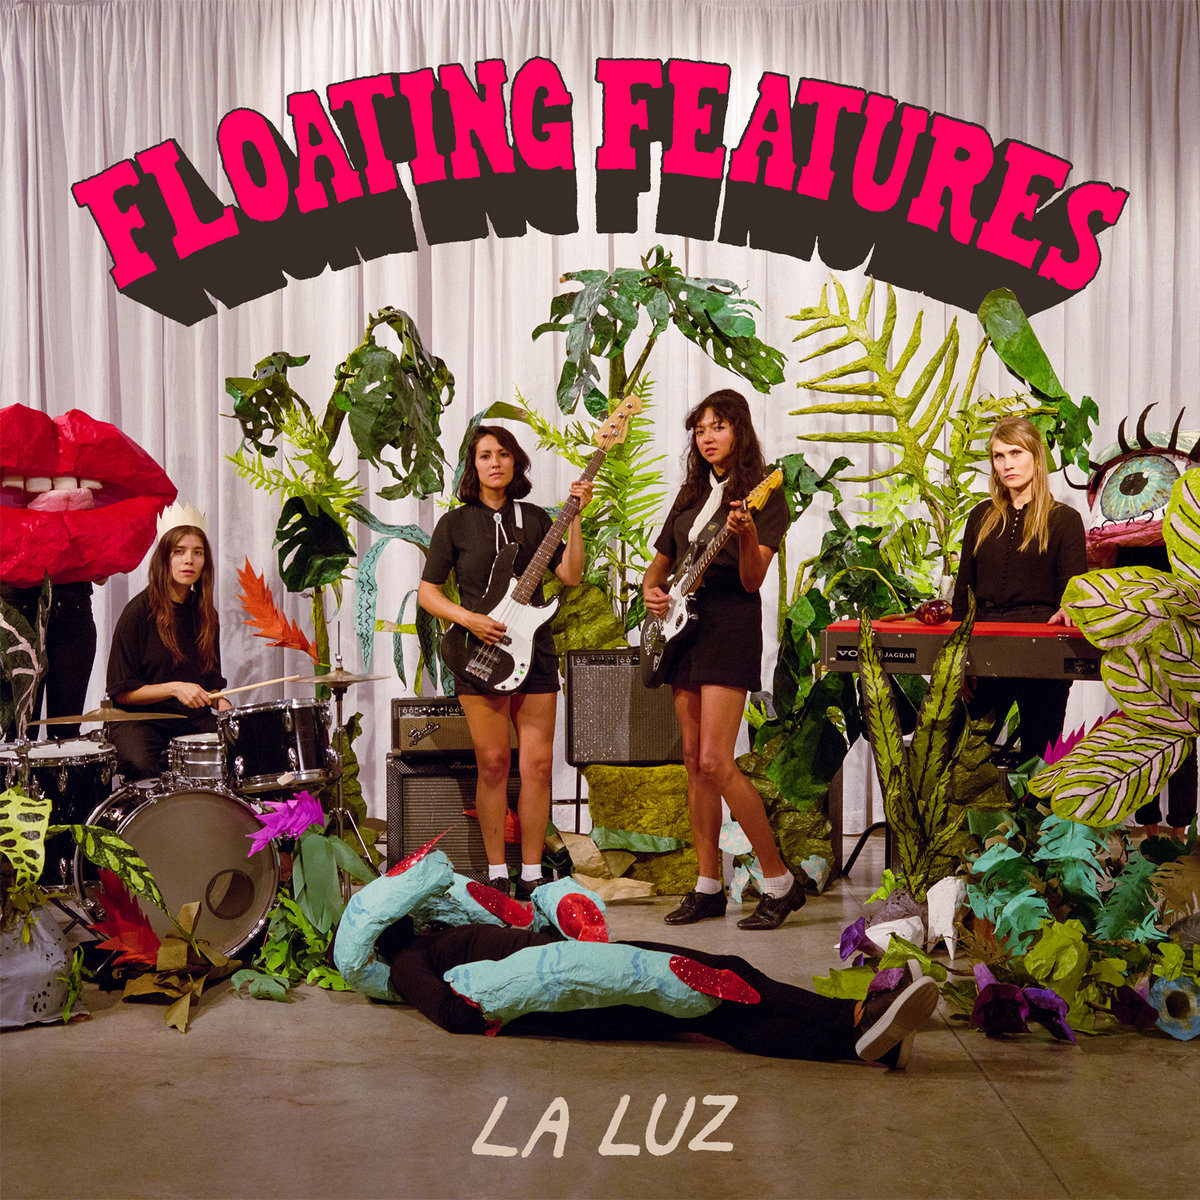 Album cover of "Floating Features" with all four band members on the front